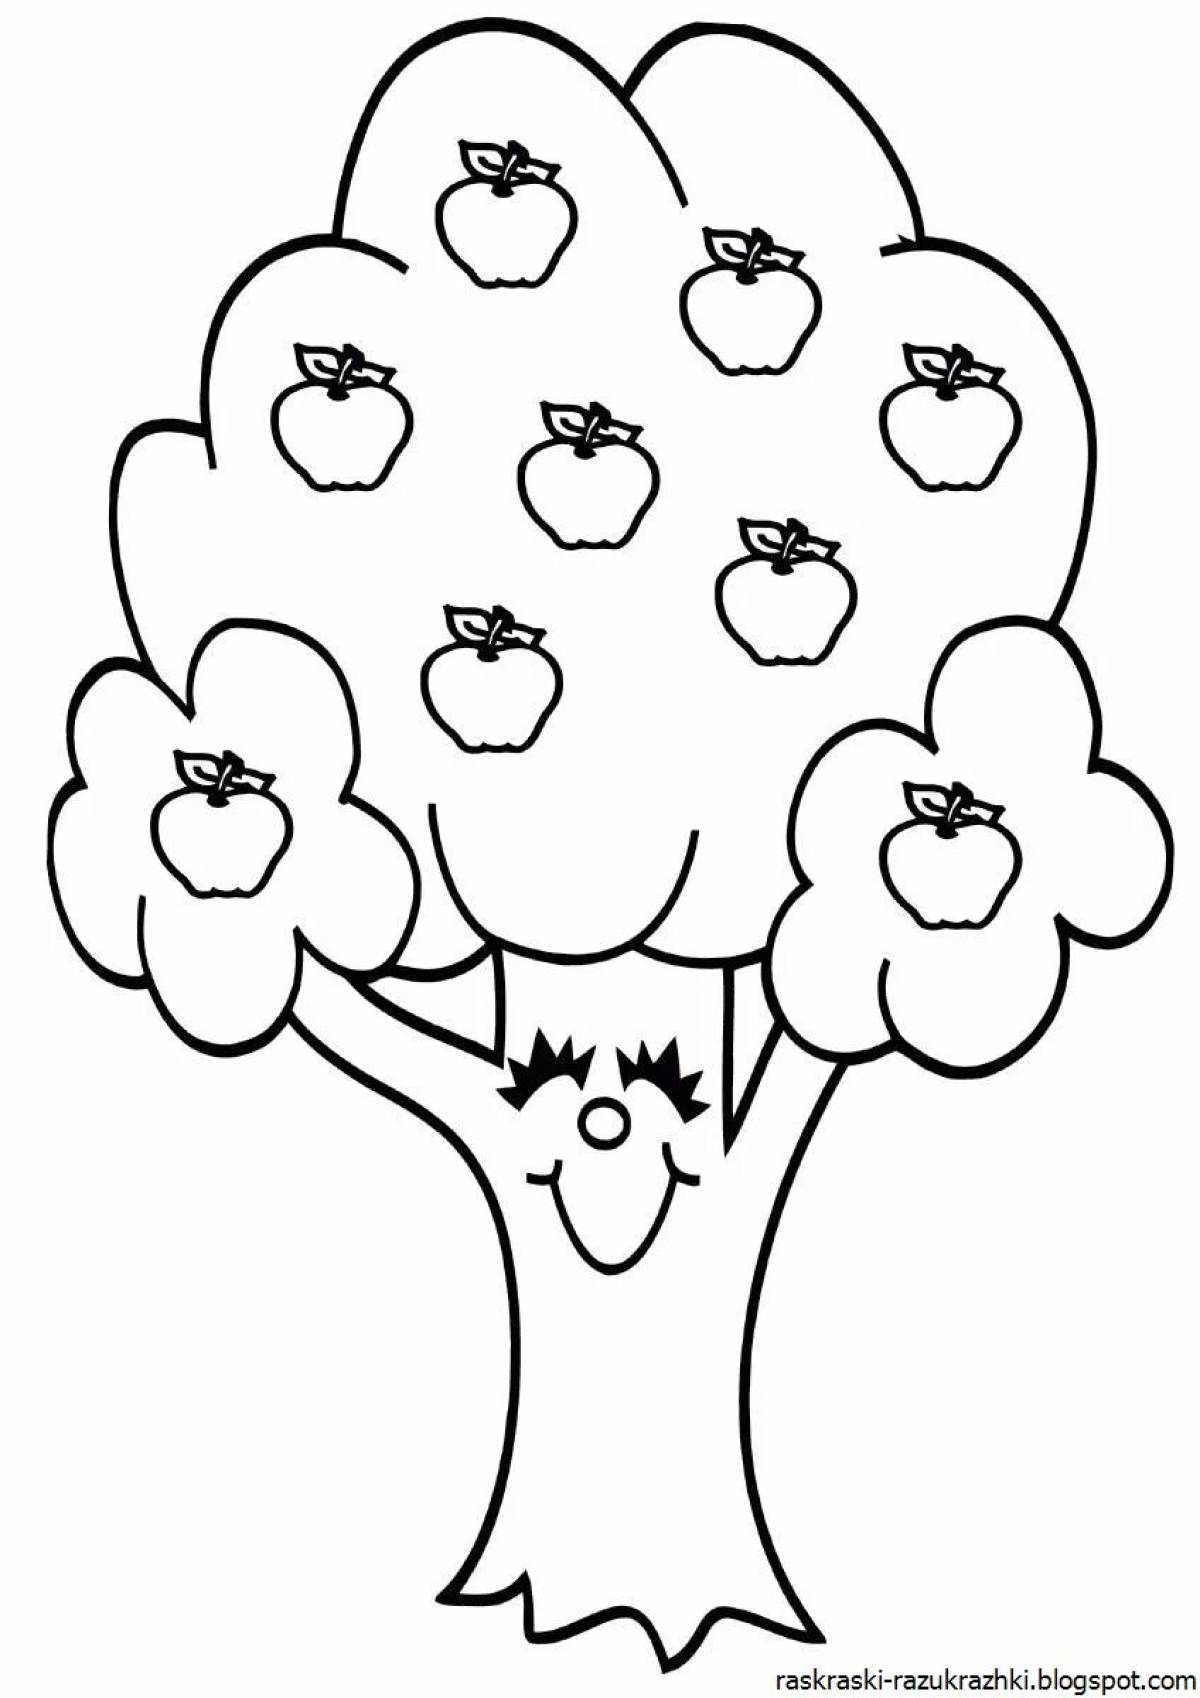 Big apple tree coloring book for kids